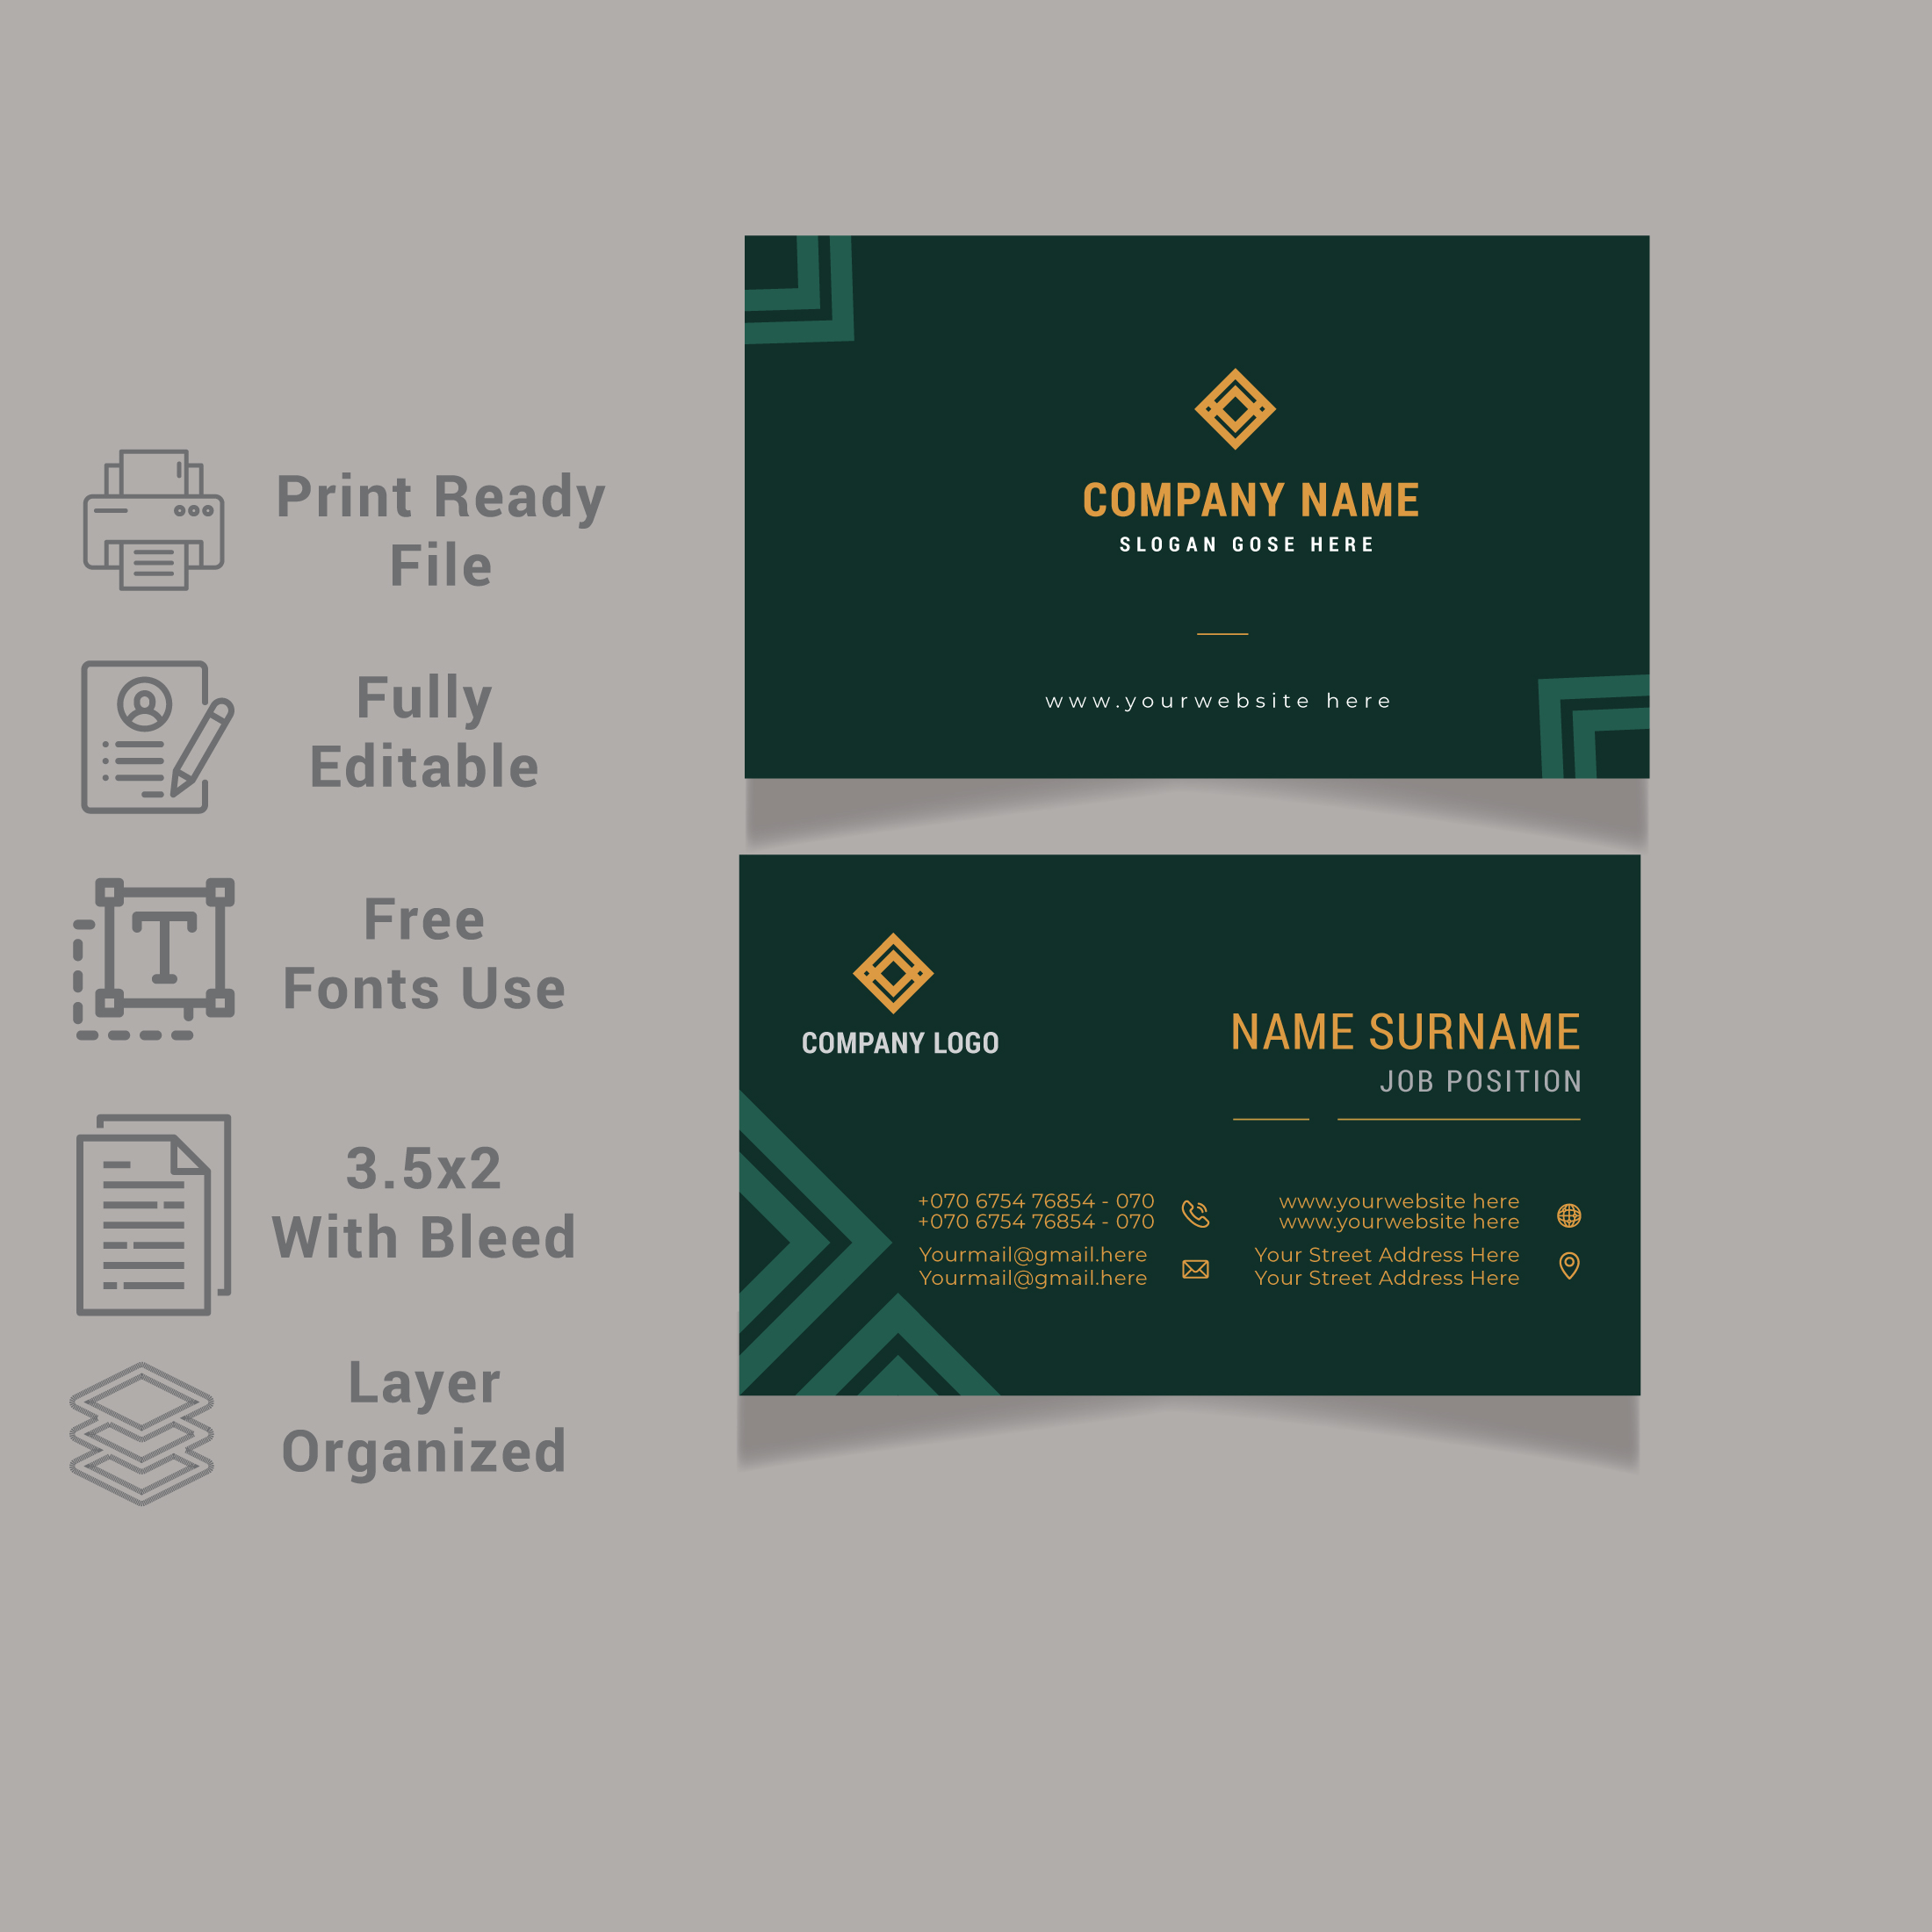 A green business card with a gold logo.